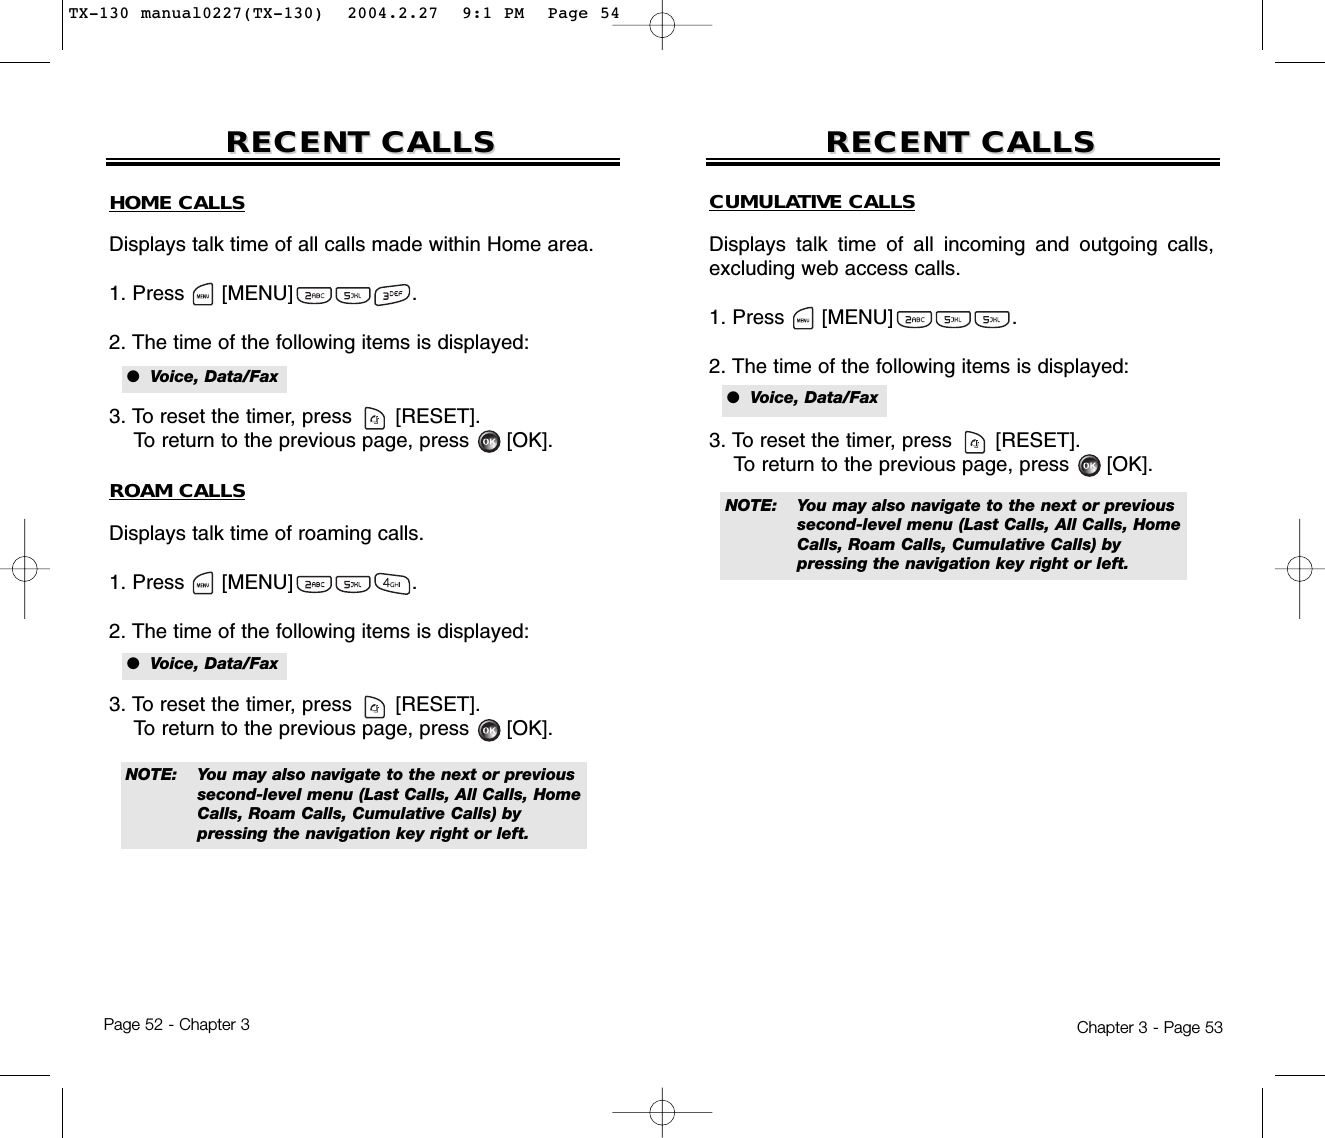 Chapter 3 - Page 53Page 52 - Chapter 3RECENT CALLSRECENT CALLS RECENT CALLSRECENT CALLSNOTE: You may also navigate to the next or previous second-level menu (Last Calls, All Calls, Home Calls, Roam Calls, Cumulative Calls) by pressing the navigation key right or left.HOME CALLSDisplays talk time of all calls made within Home area.1. Press      [MENU]                   .2. The time of the following items is displayed:3. To reset the timer, press       [RESET]. To return to the previous page, press      [OK].ROAM CALLSDisplays talk time of roaming calls.1. Press      [MENU]                   .2. The time of the following items is displayed:3. To reset the timer, press       [RESET]. To return to the previous page, press      [OK].●  Voice, Data/Fax●  Voice, Data/FaxCUMULATIVE CALLSDisplays talk time of all incoming and outgoing calls,excluding web access calls.1. Press      [MENU]                   .2. The time of the following items is displayed:3. To reset the timer, press       [RESET]. To return to the previous page, press      [OK].●  Voice, Data/FaxNOTE: You may also navigate to the next or previous second-level menu (Last Calls, All Calls, Home Calls, Roam Calls, Cumulative Calls) by pressing the navigation key right or left.TX-130 manual0227(TX-130)  2004.2.27  9:1 PM  Page 54